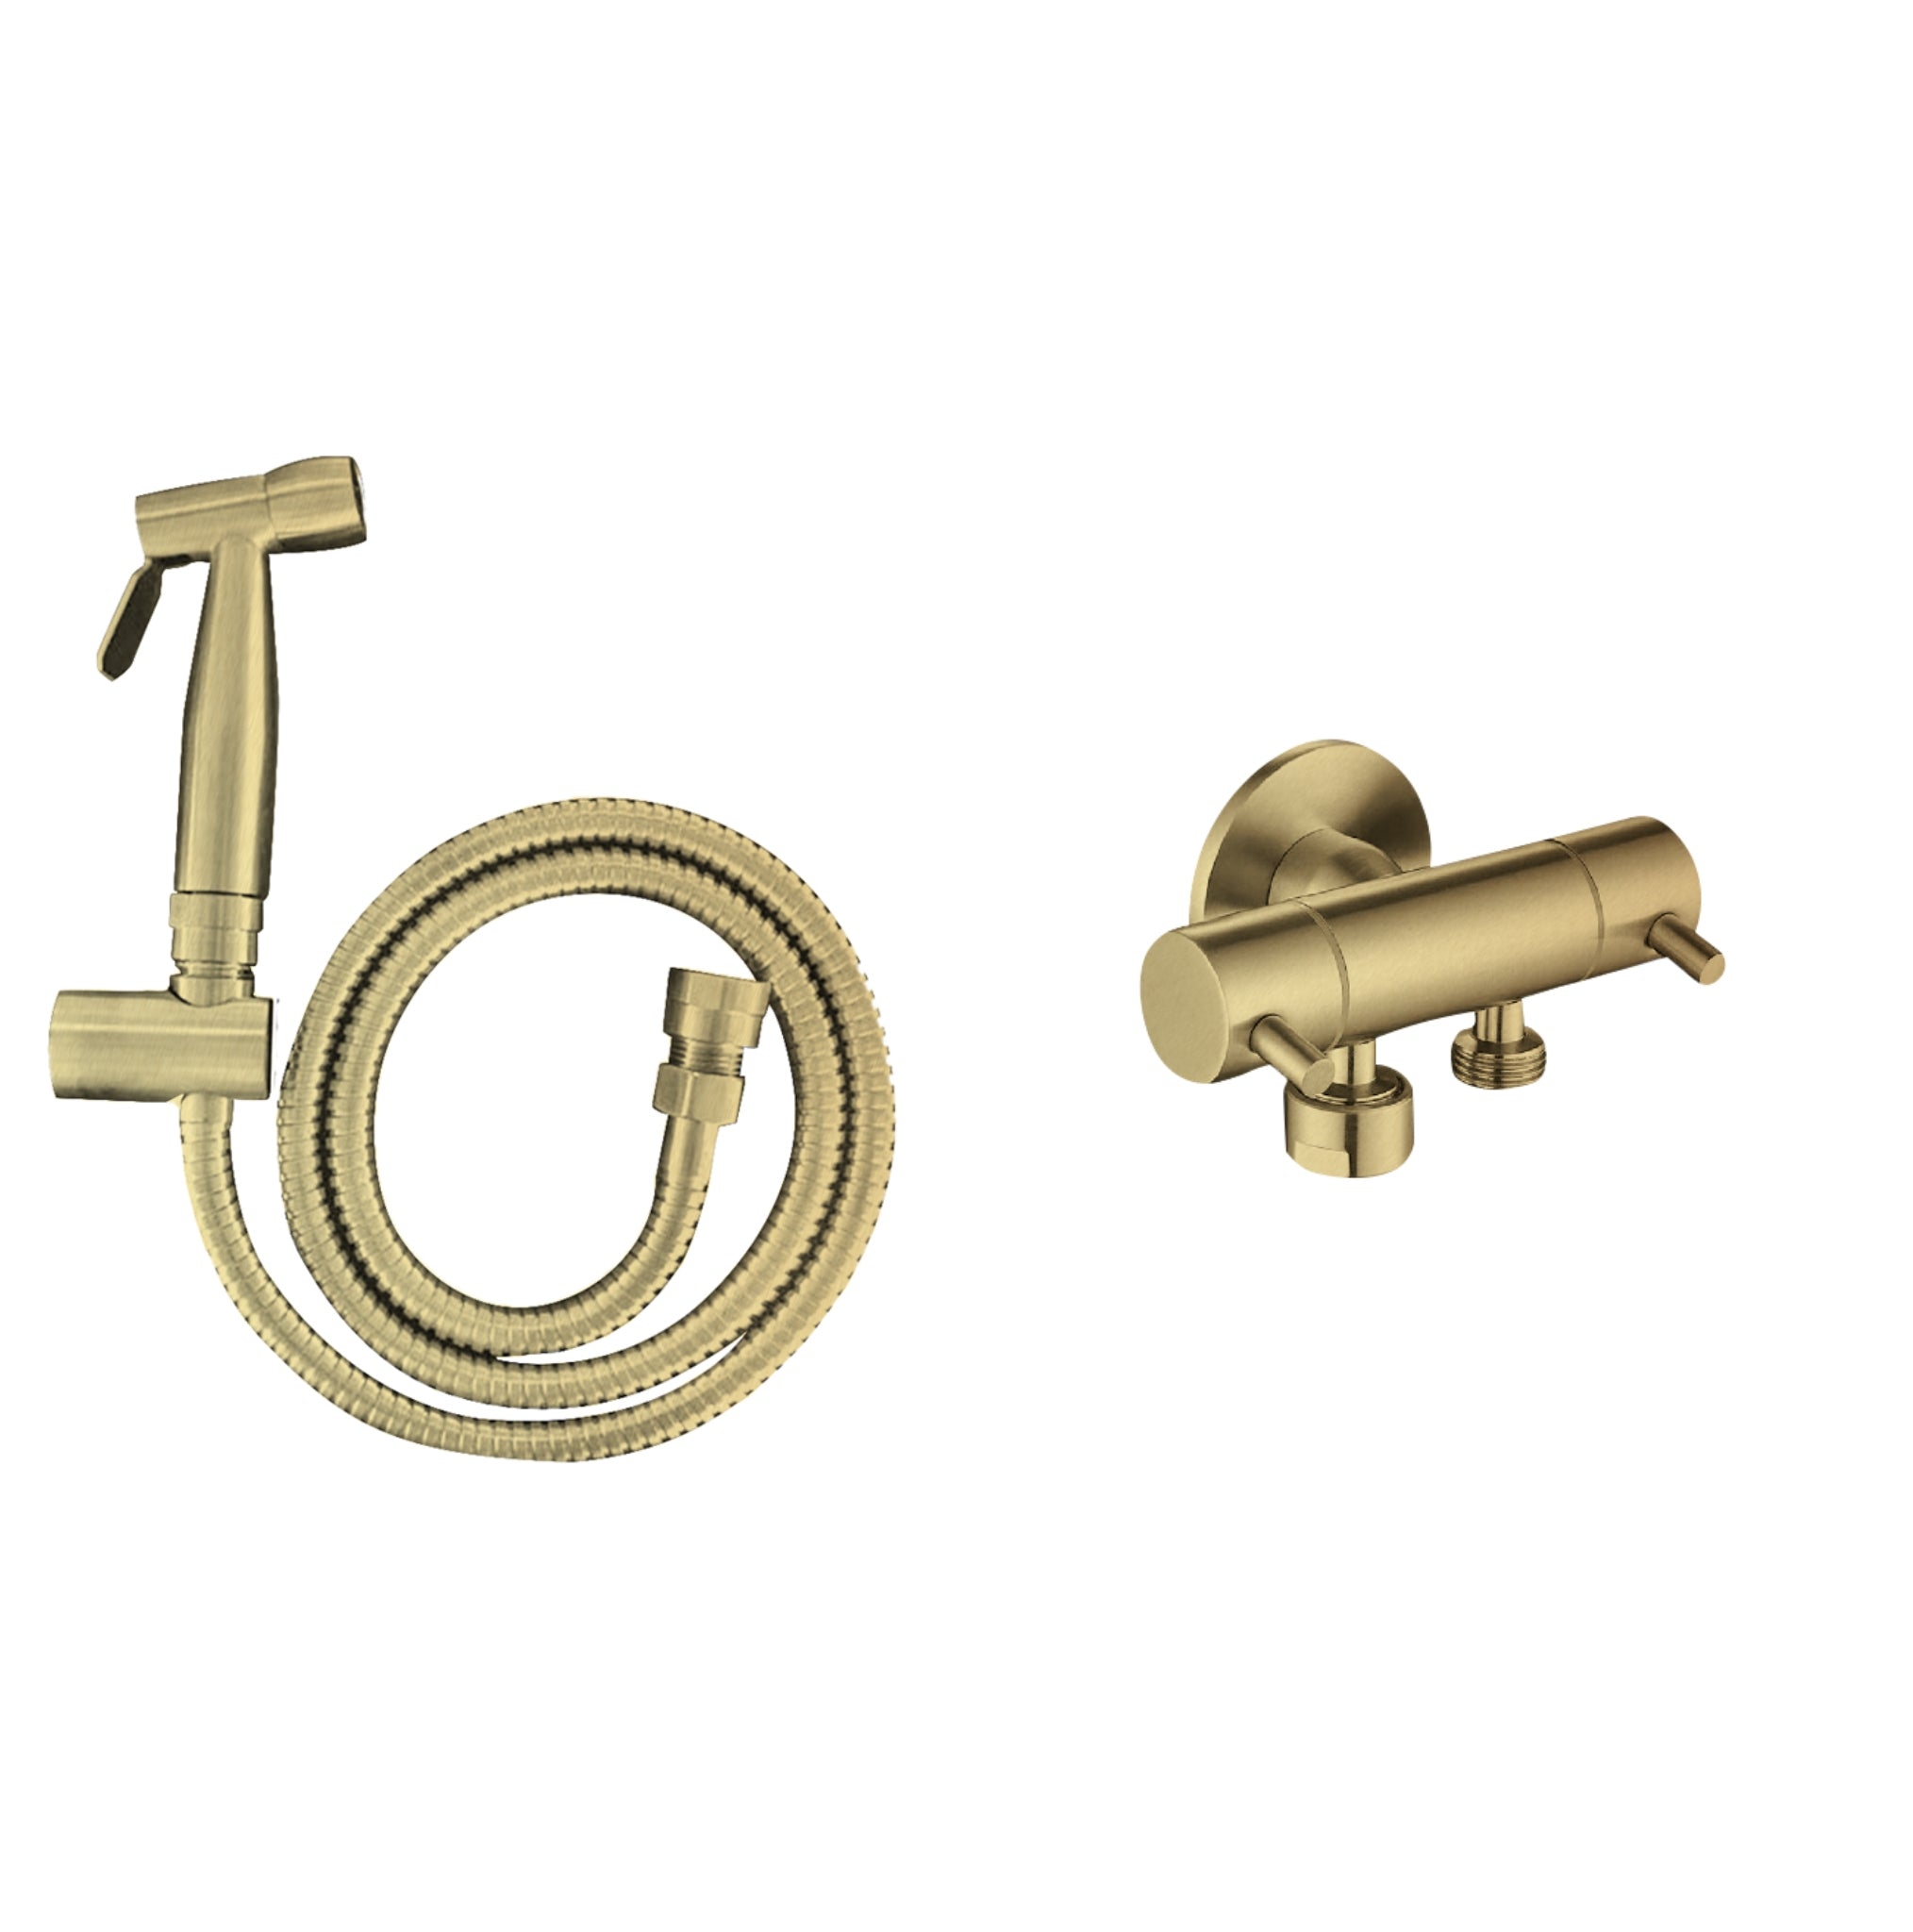 LINKWARE TRIGGER SPRAY WITH REINFORCED HOSE & DUAL MINI CISTERN COCK BRUSHED GOLD 1200MM